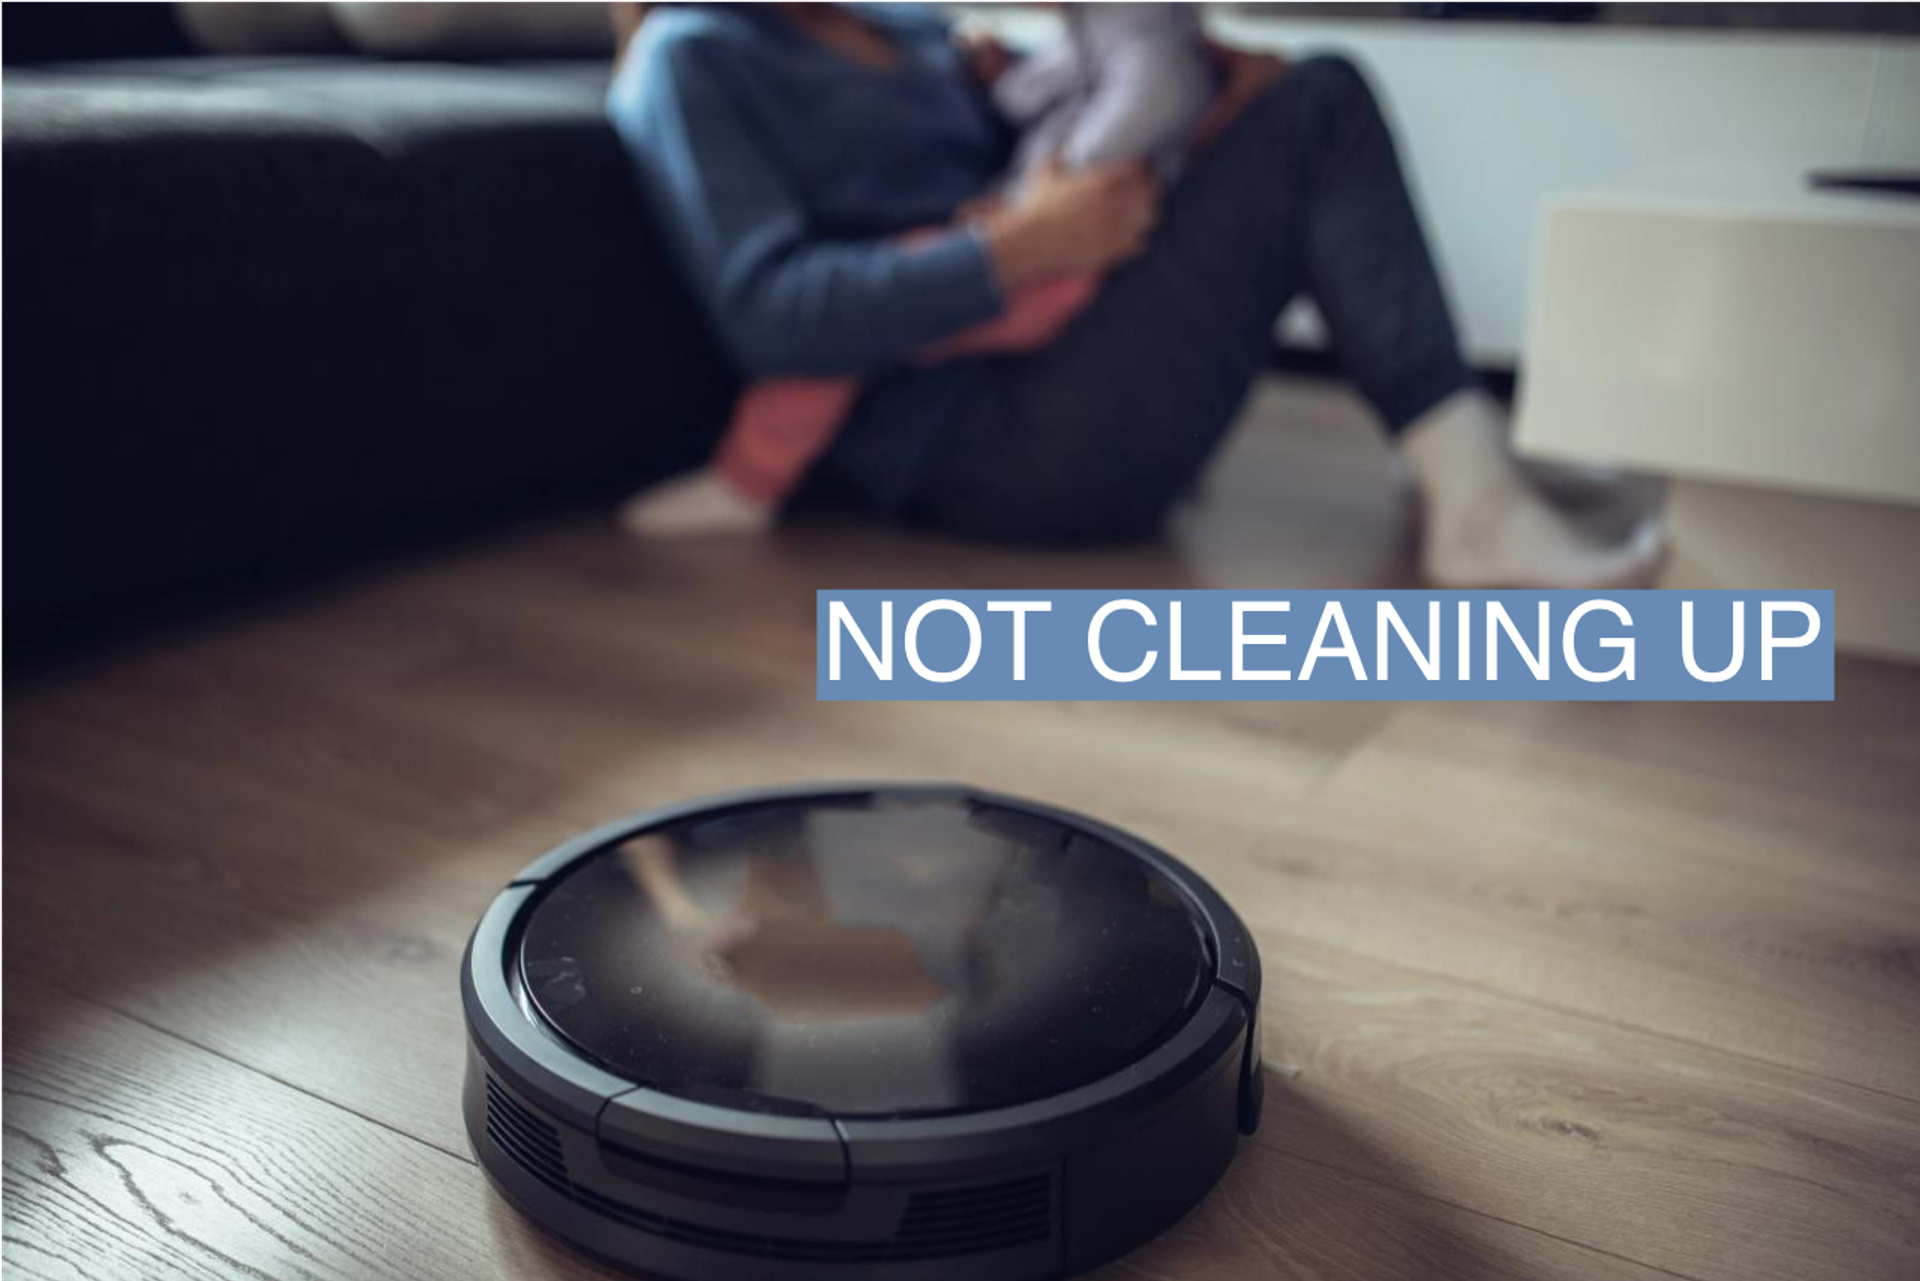 Robotic Vacuum Cleaner Cleaning Floor While Mother and Daughter Playing on the sofa